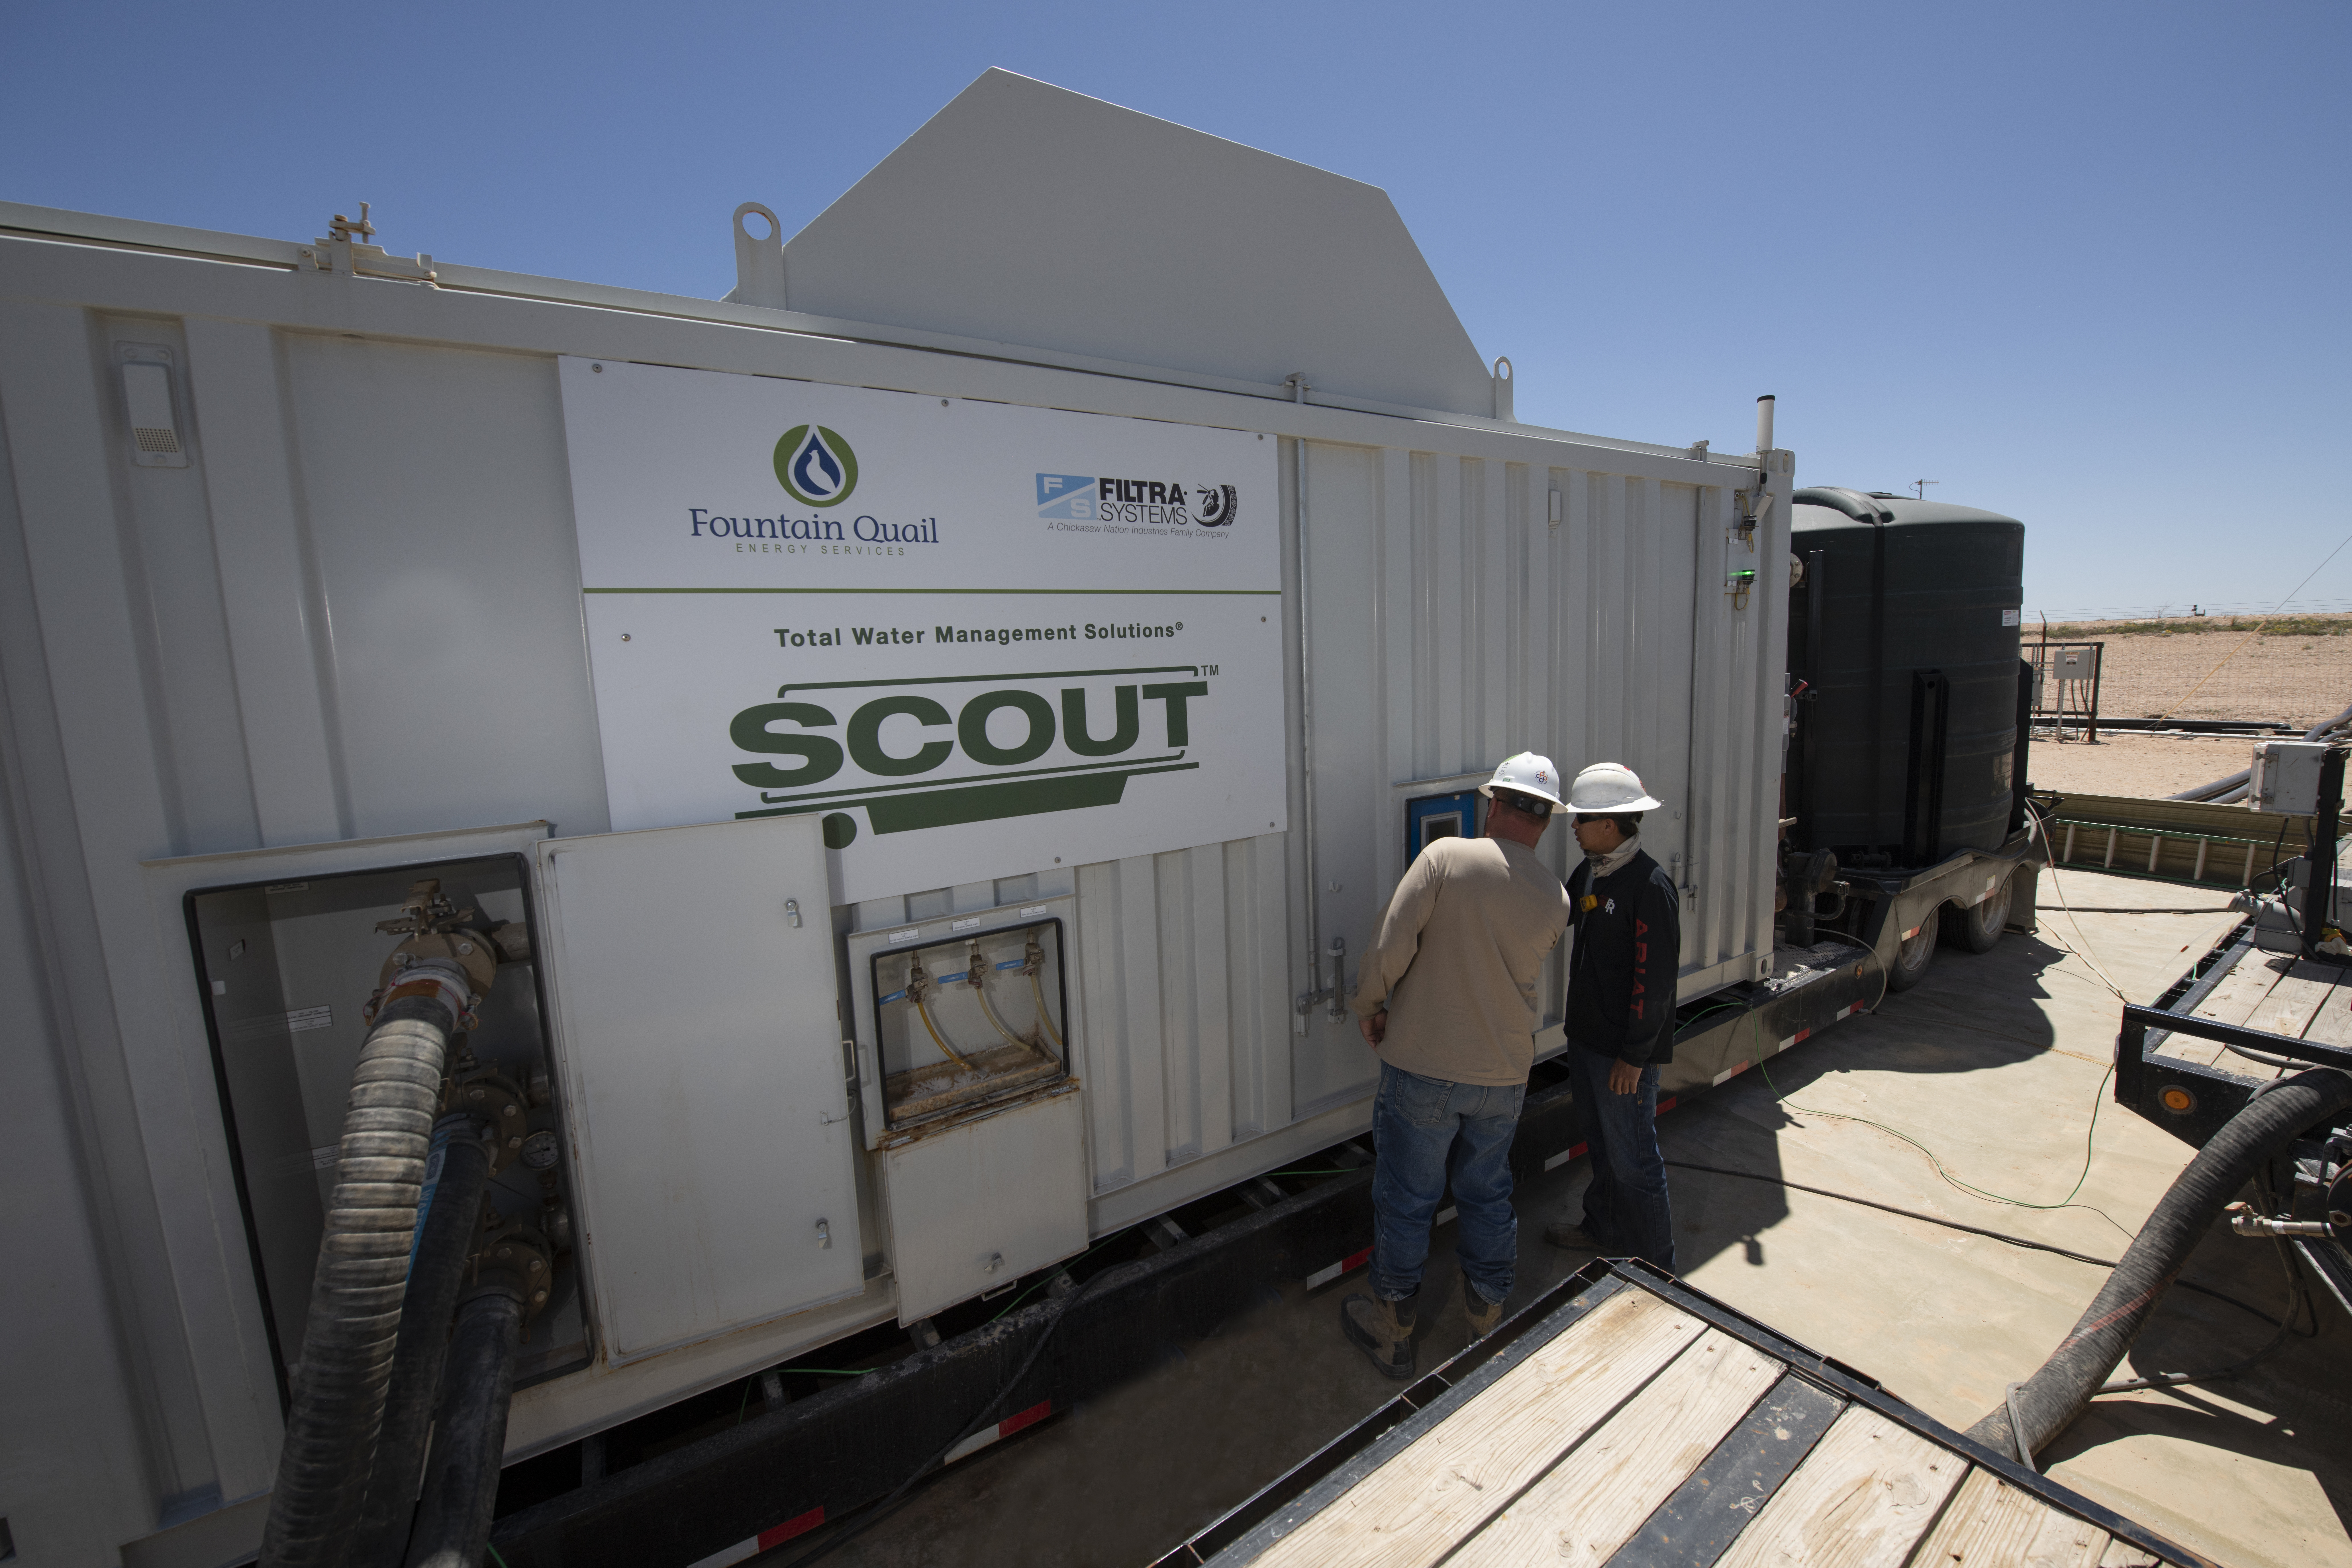 One of the 14 mobile SCOUT units operated in the Permian Basin in May. (Source: Fountain Quail Water Management)